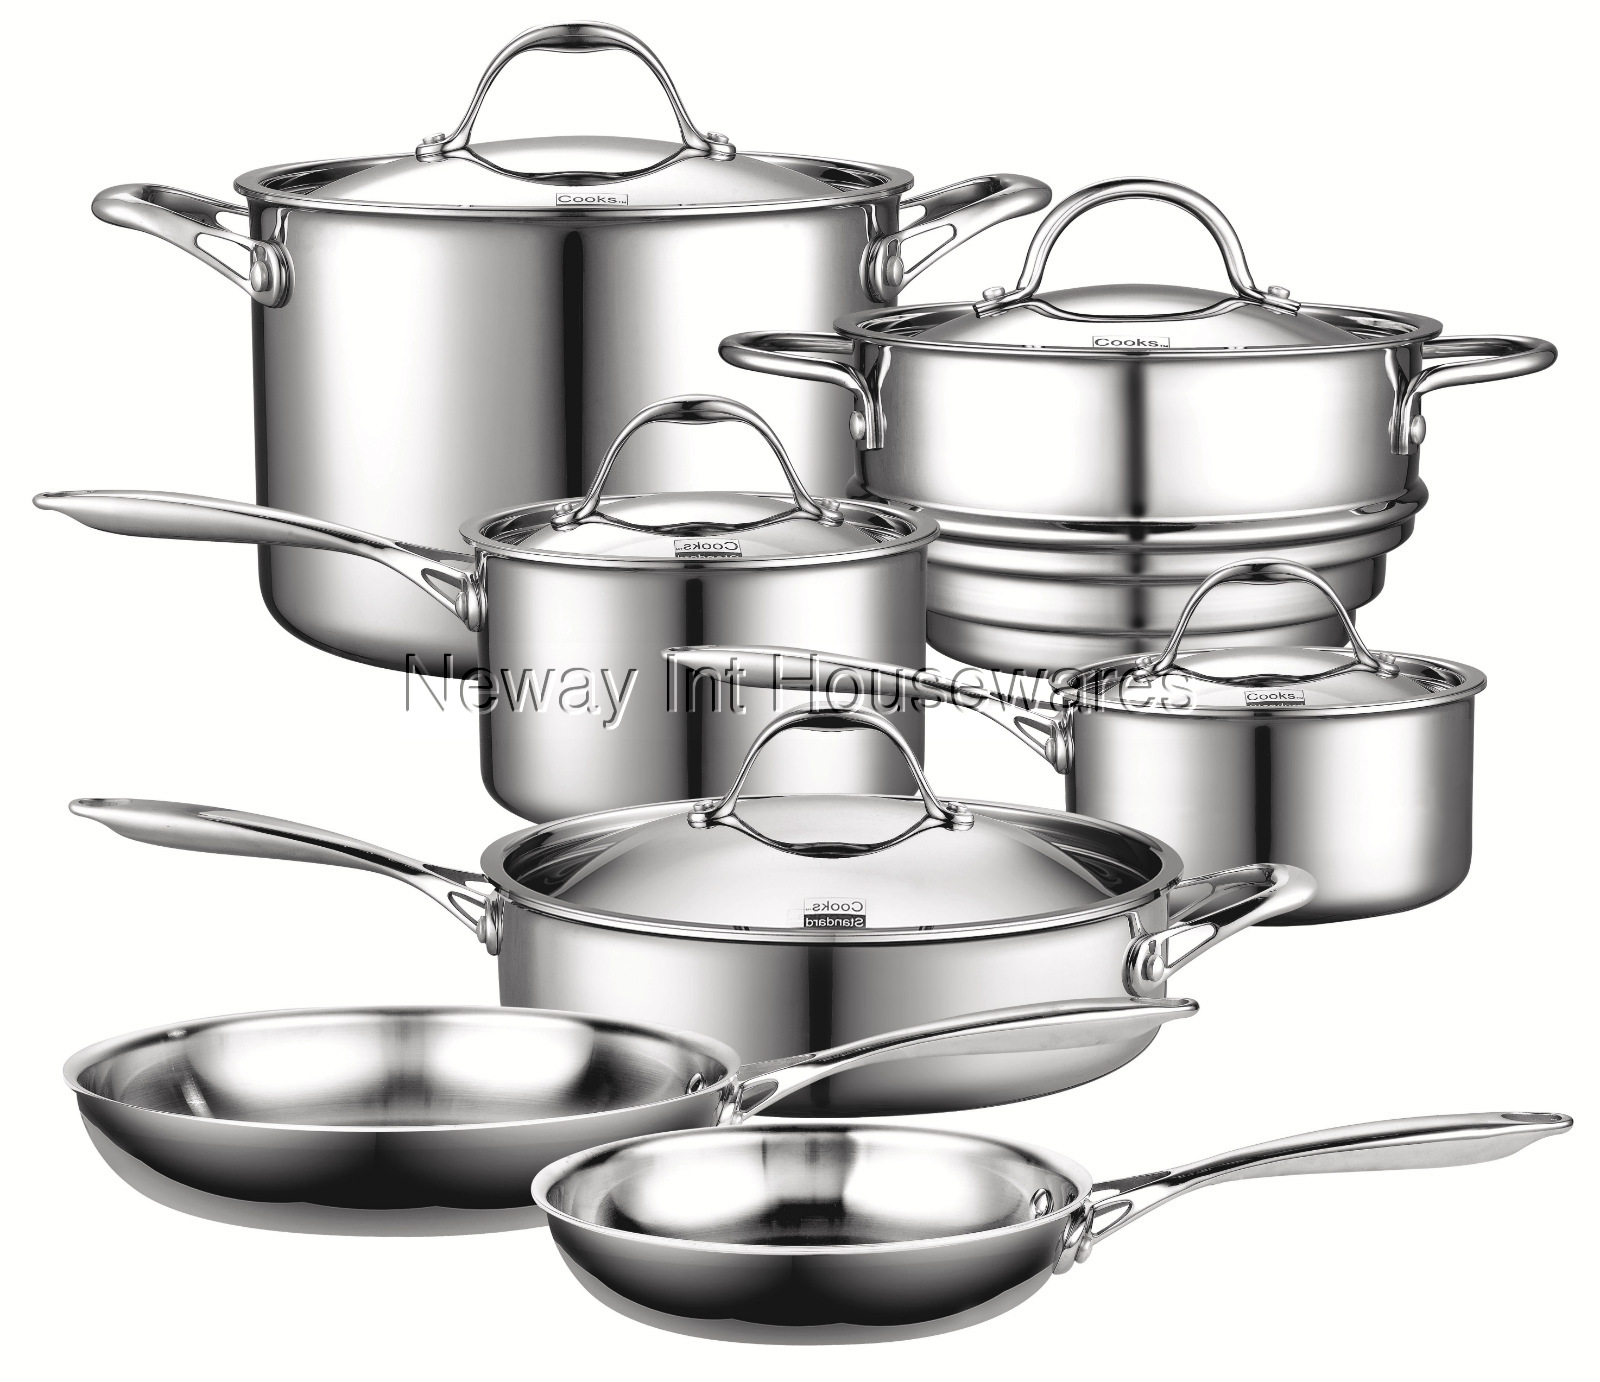 Cook N Home 12-Piece Stainless Steel Cookware Set in Gray and